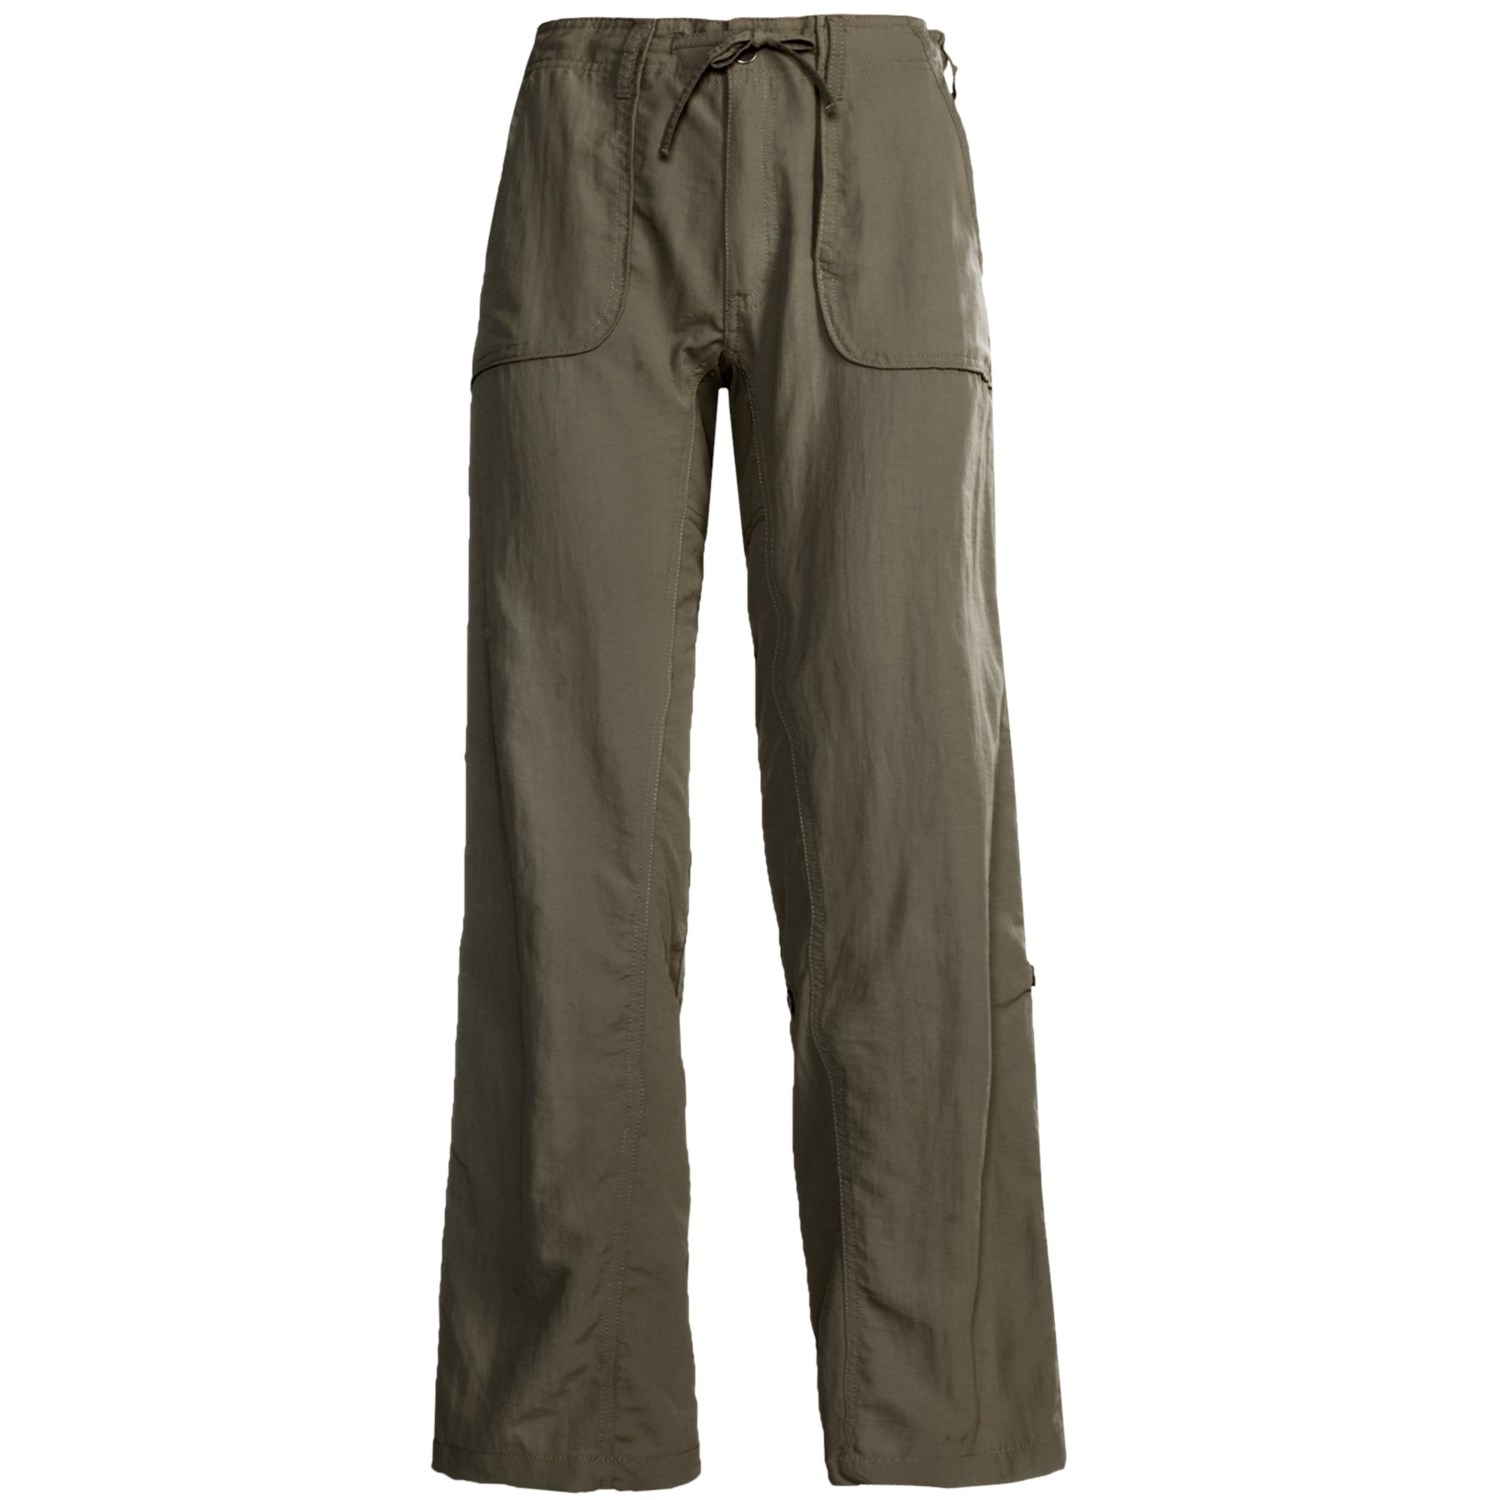 Stillwater Supply Co. Nylon Roll-Up Pants (For Women) 3242C - Save 54%